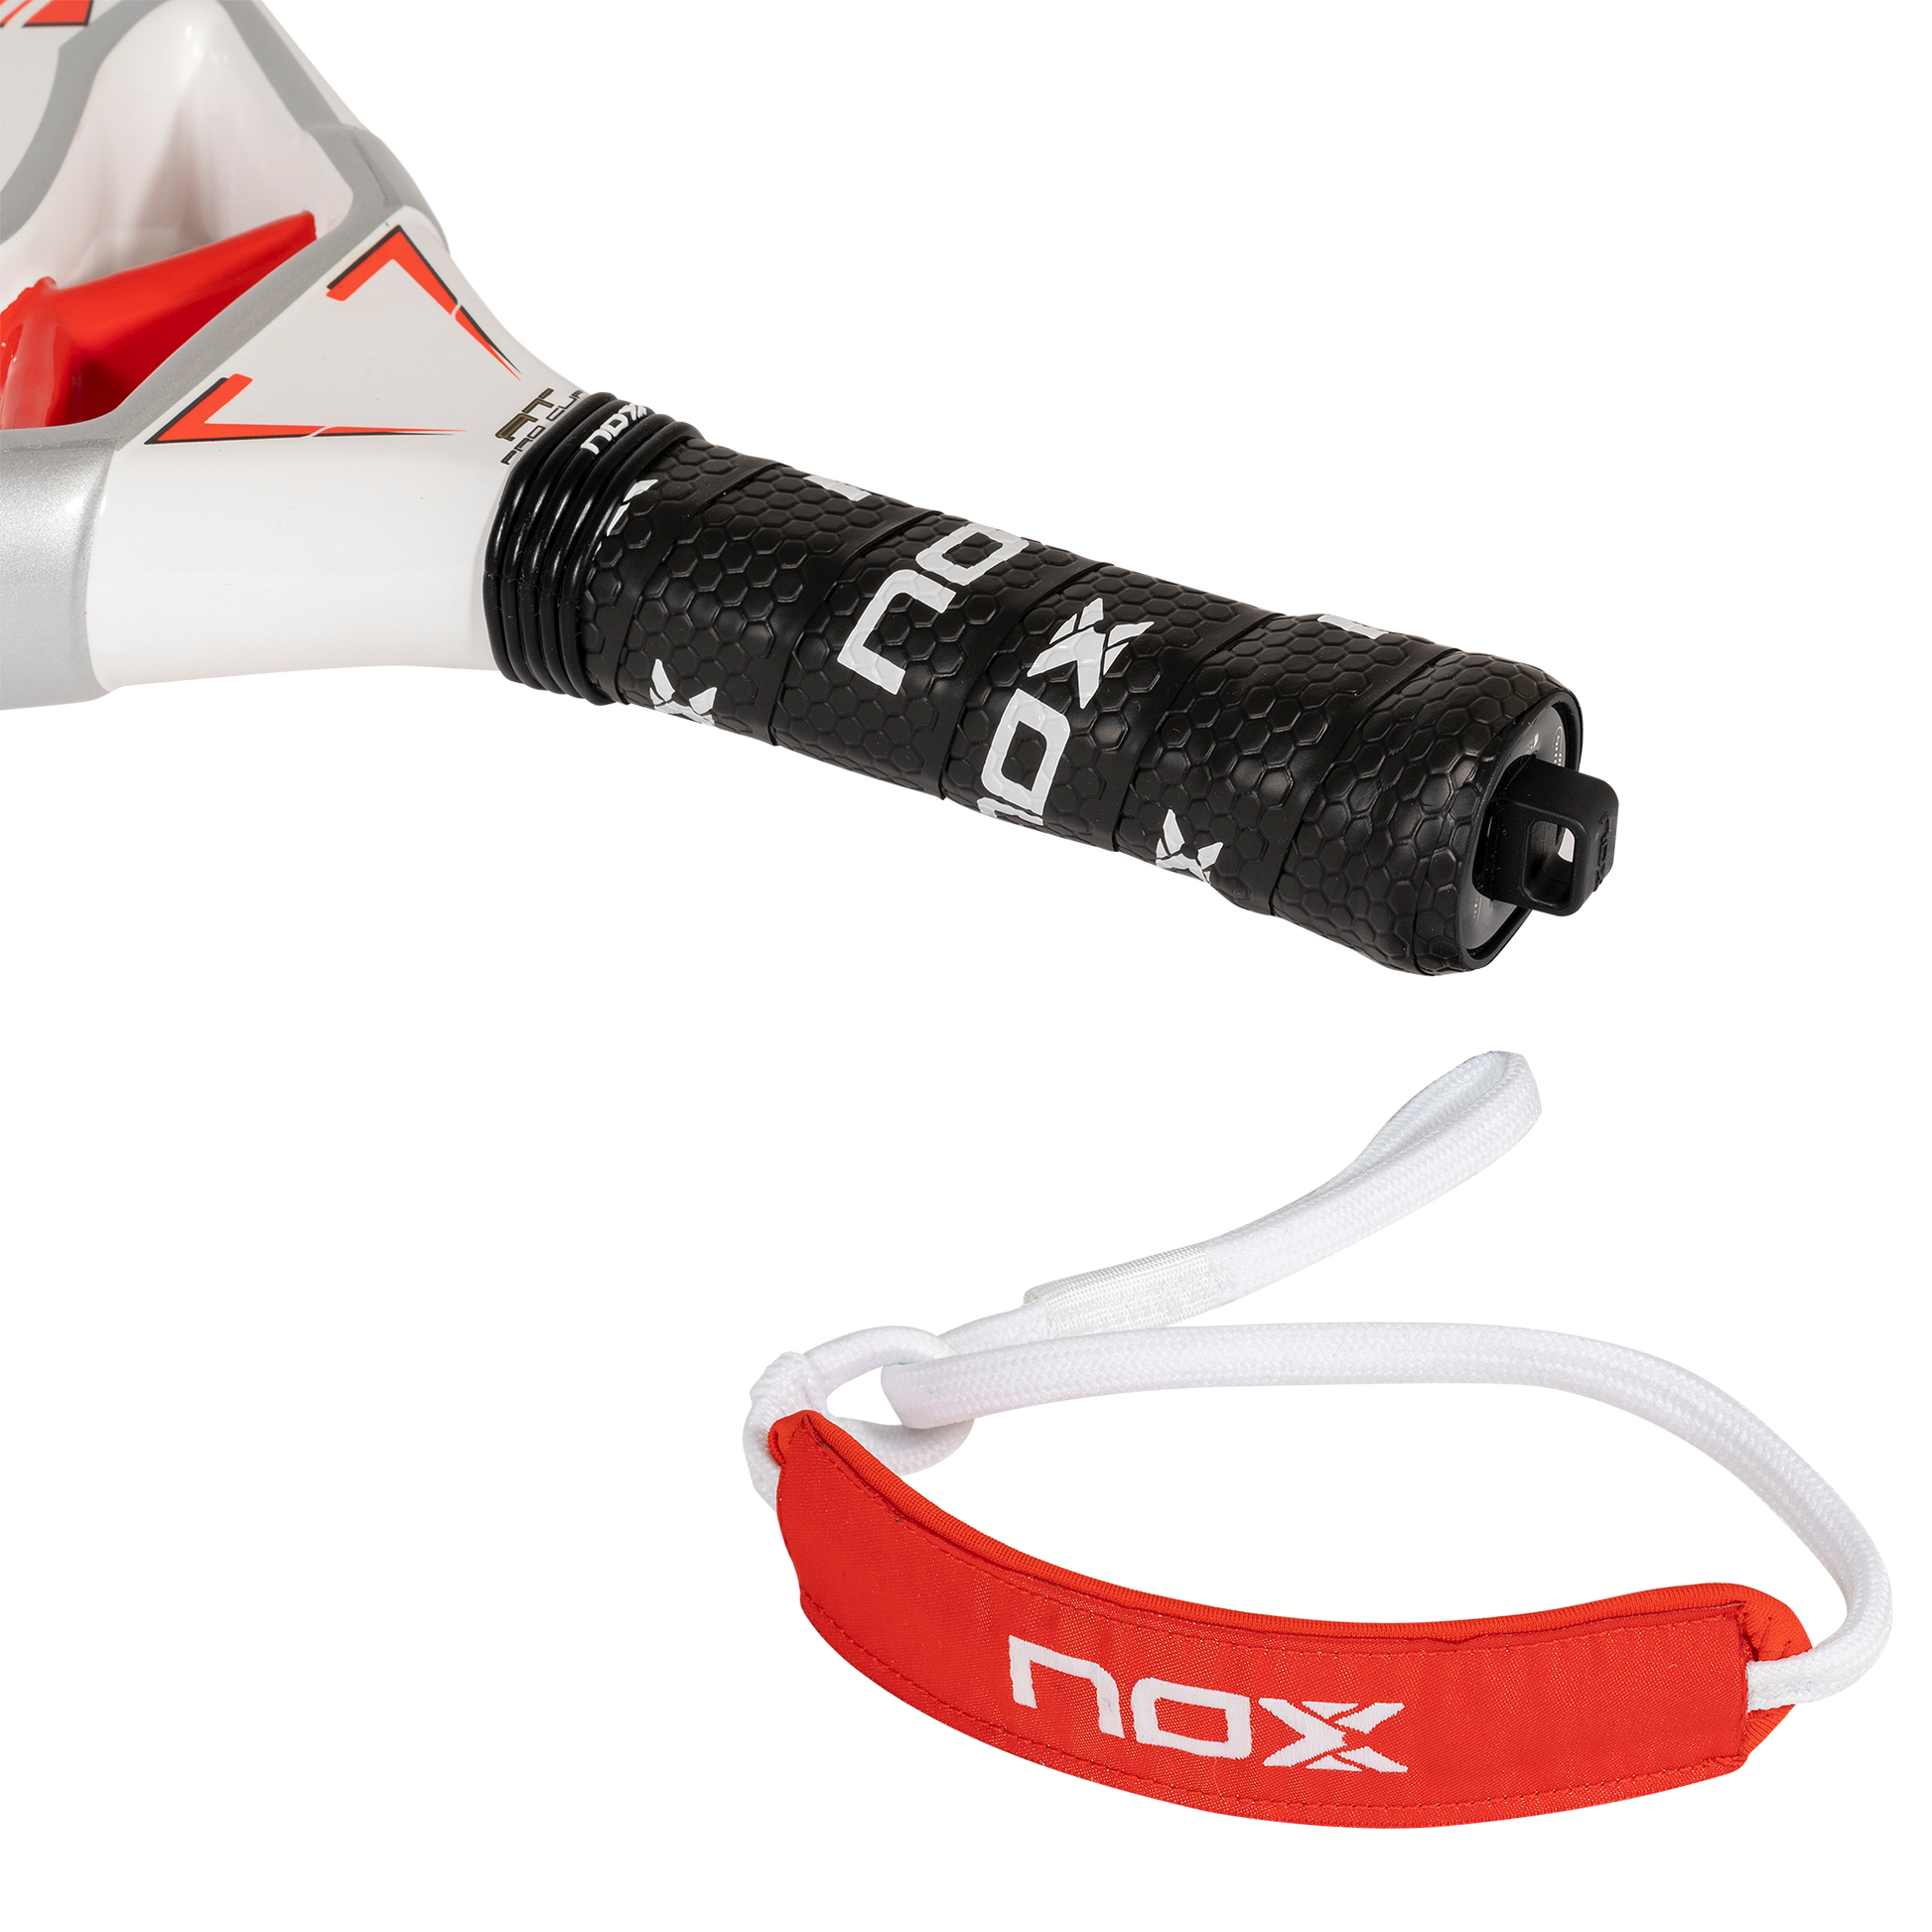 handle image of the Nox AT Pro Cup Padel Tennis Racquet on sale at thepadelshop.co.nz